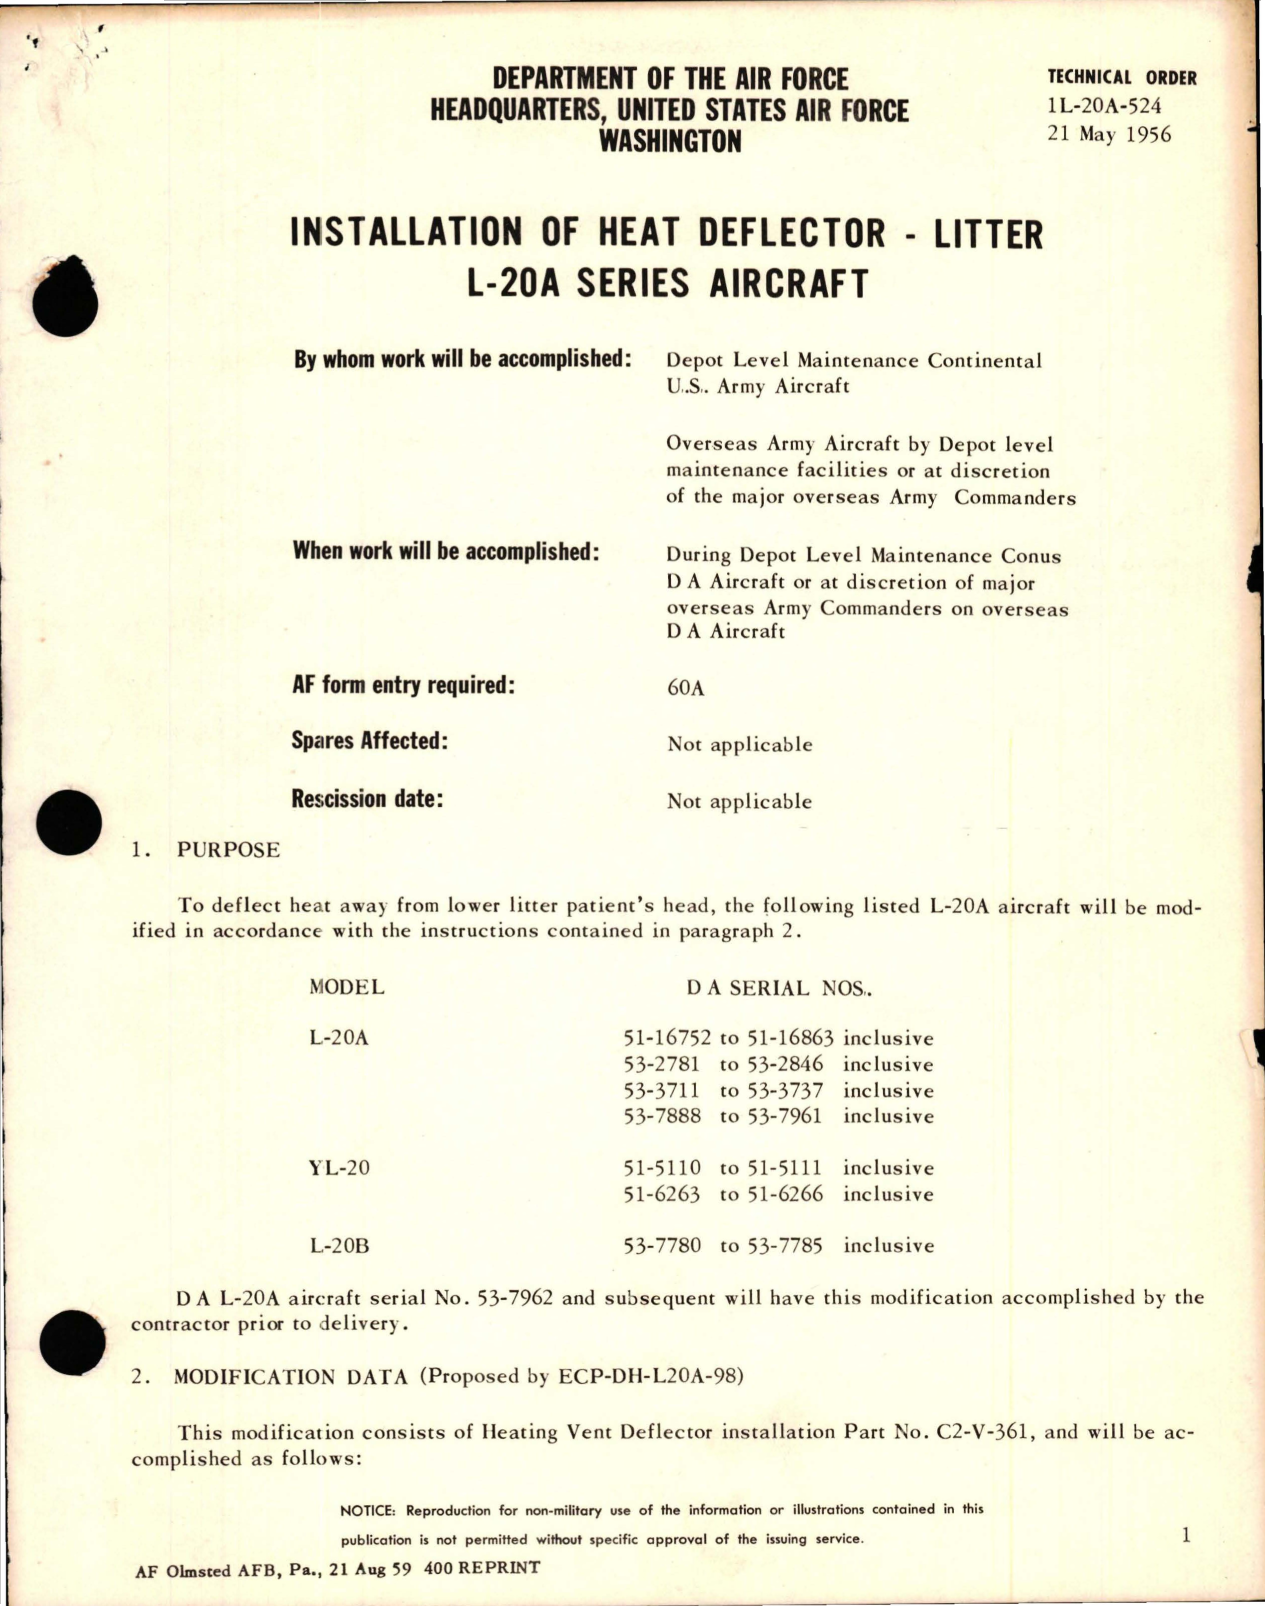 Sample page 1 from AirCorps Library document: Installation of Heat Deflector - Litter - L-20A Series